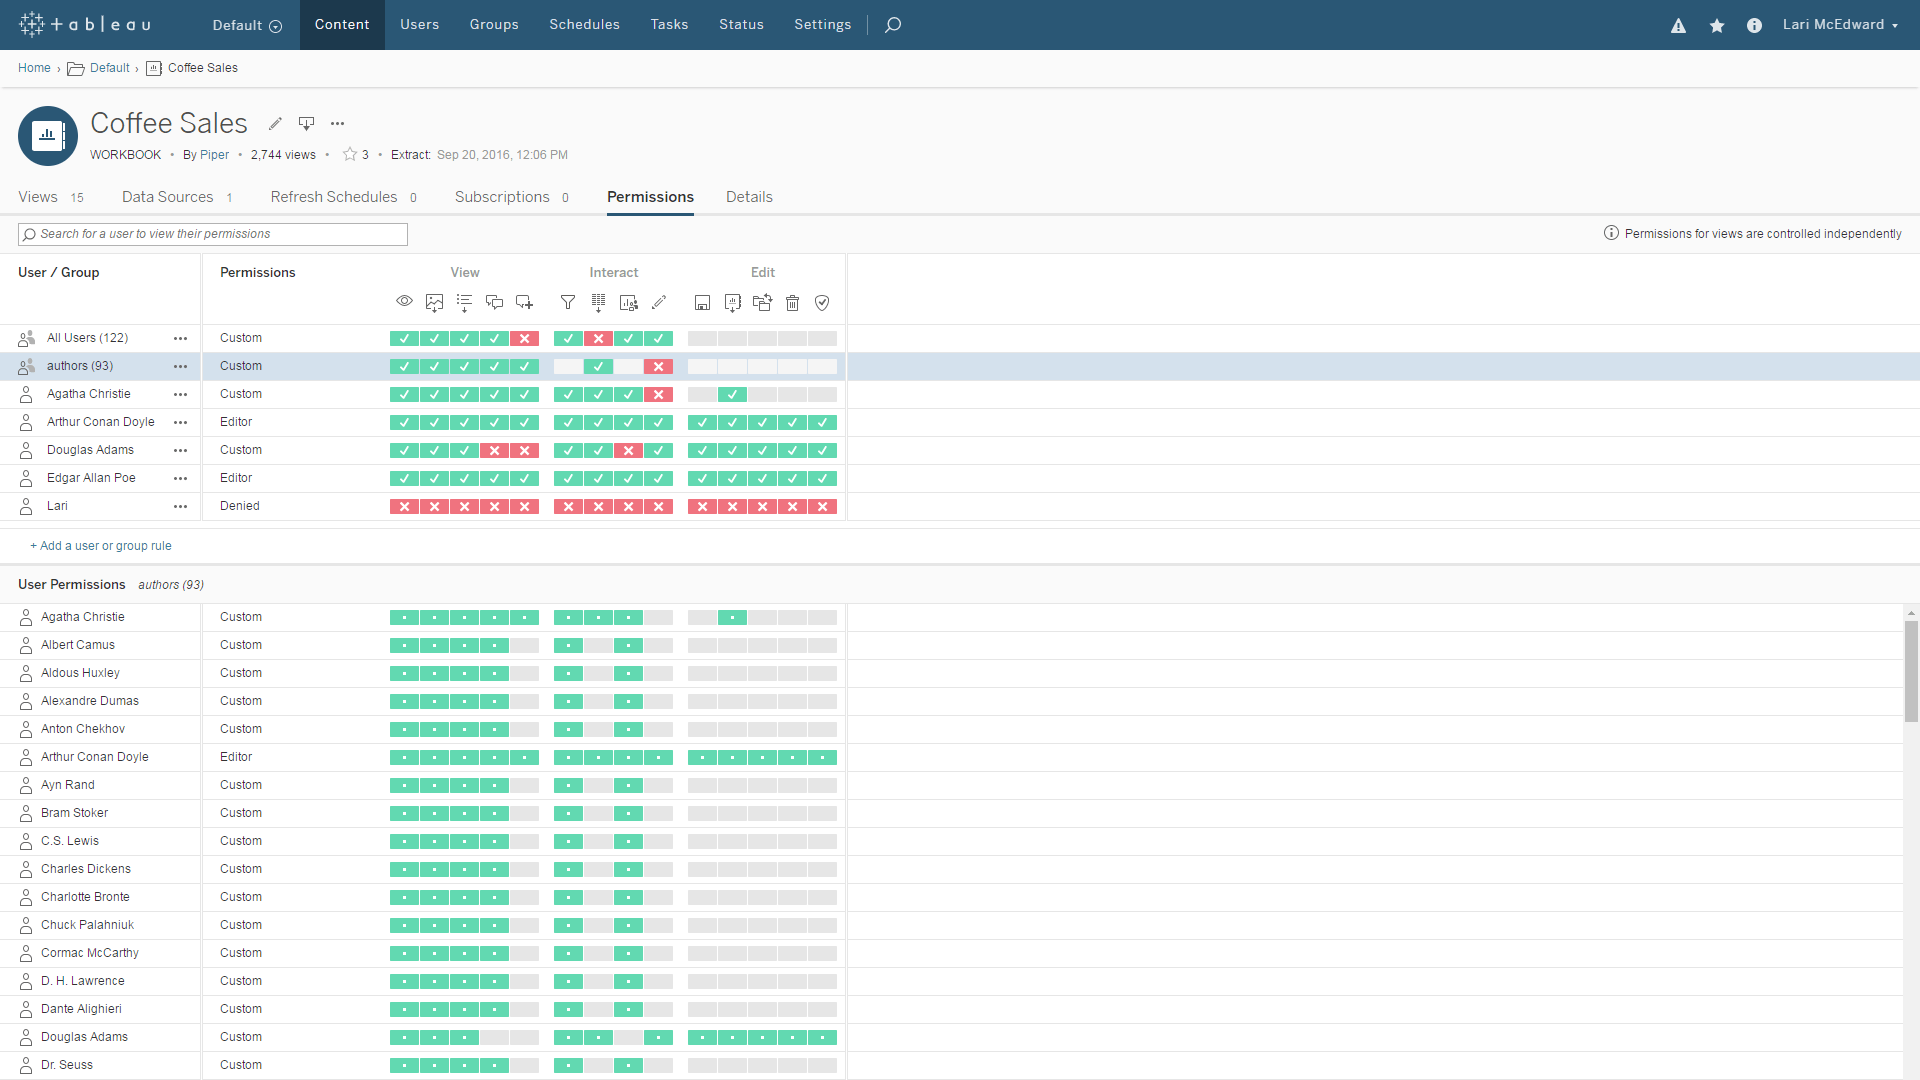 tableau viewer screenshot of server manager setting viewer permissions